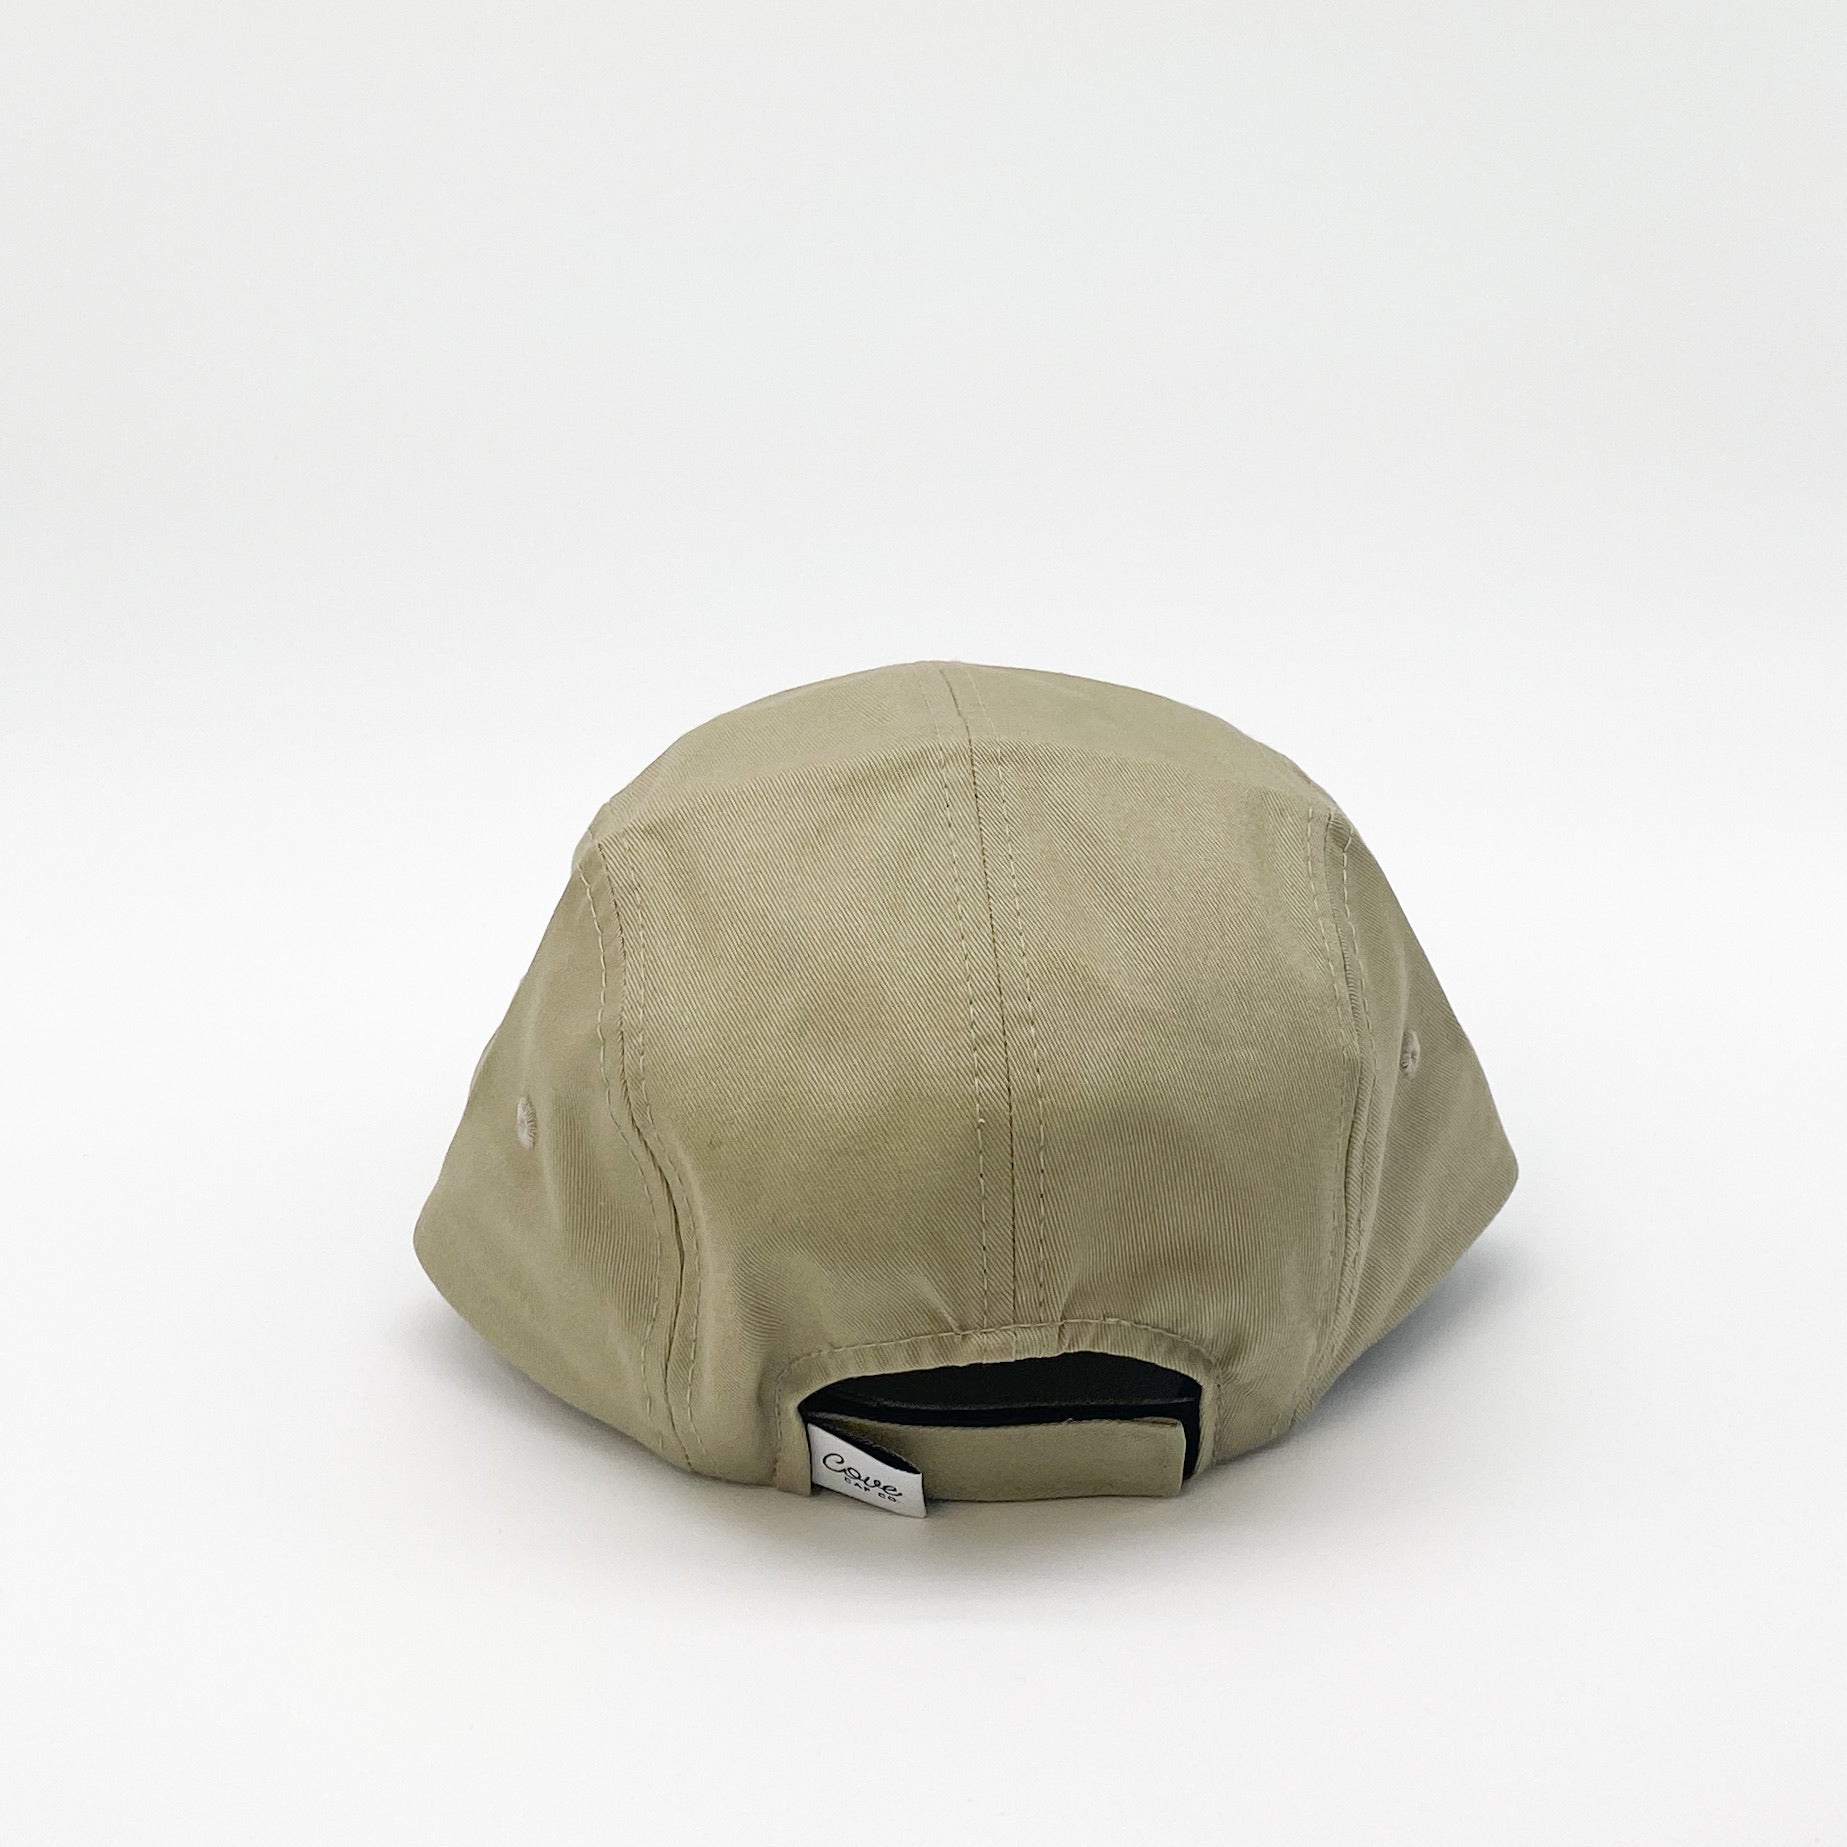 Toddler Organic Cotton Five-Panel Hat | Made in Canada – Cove Cap